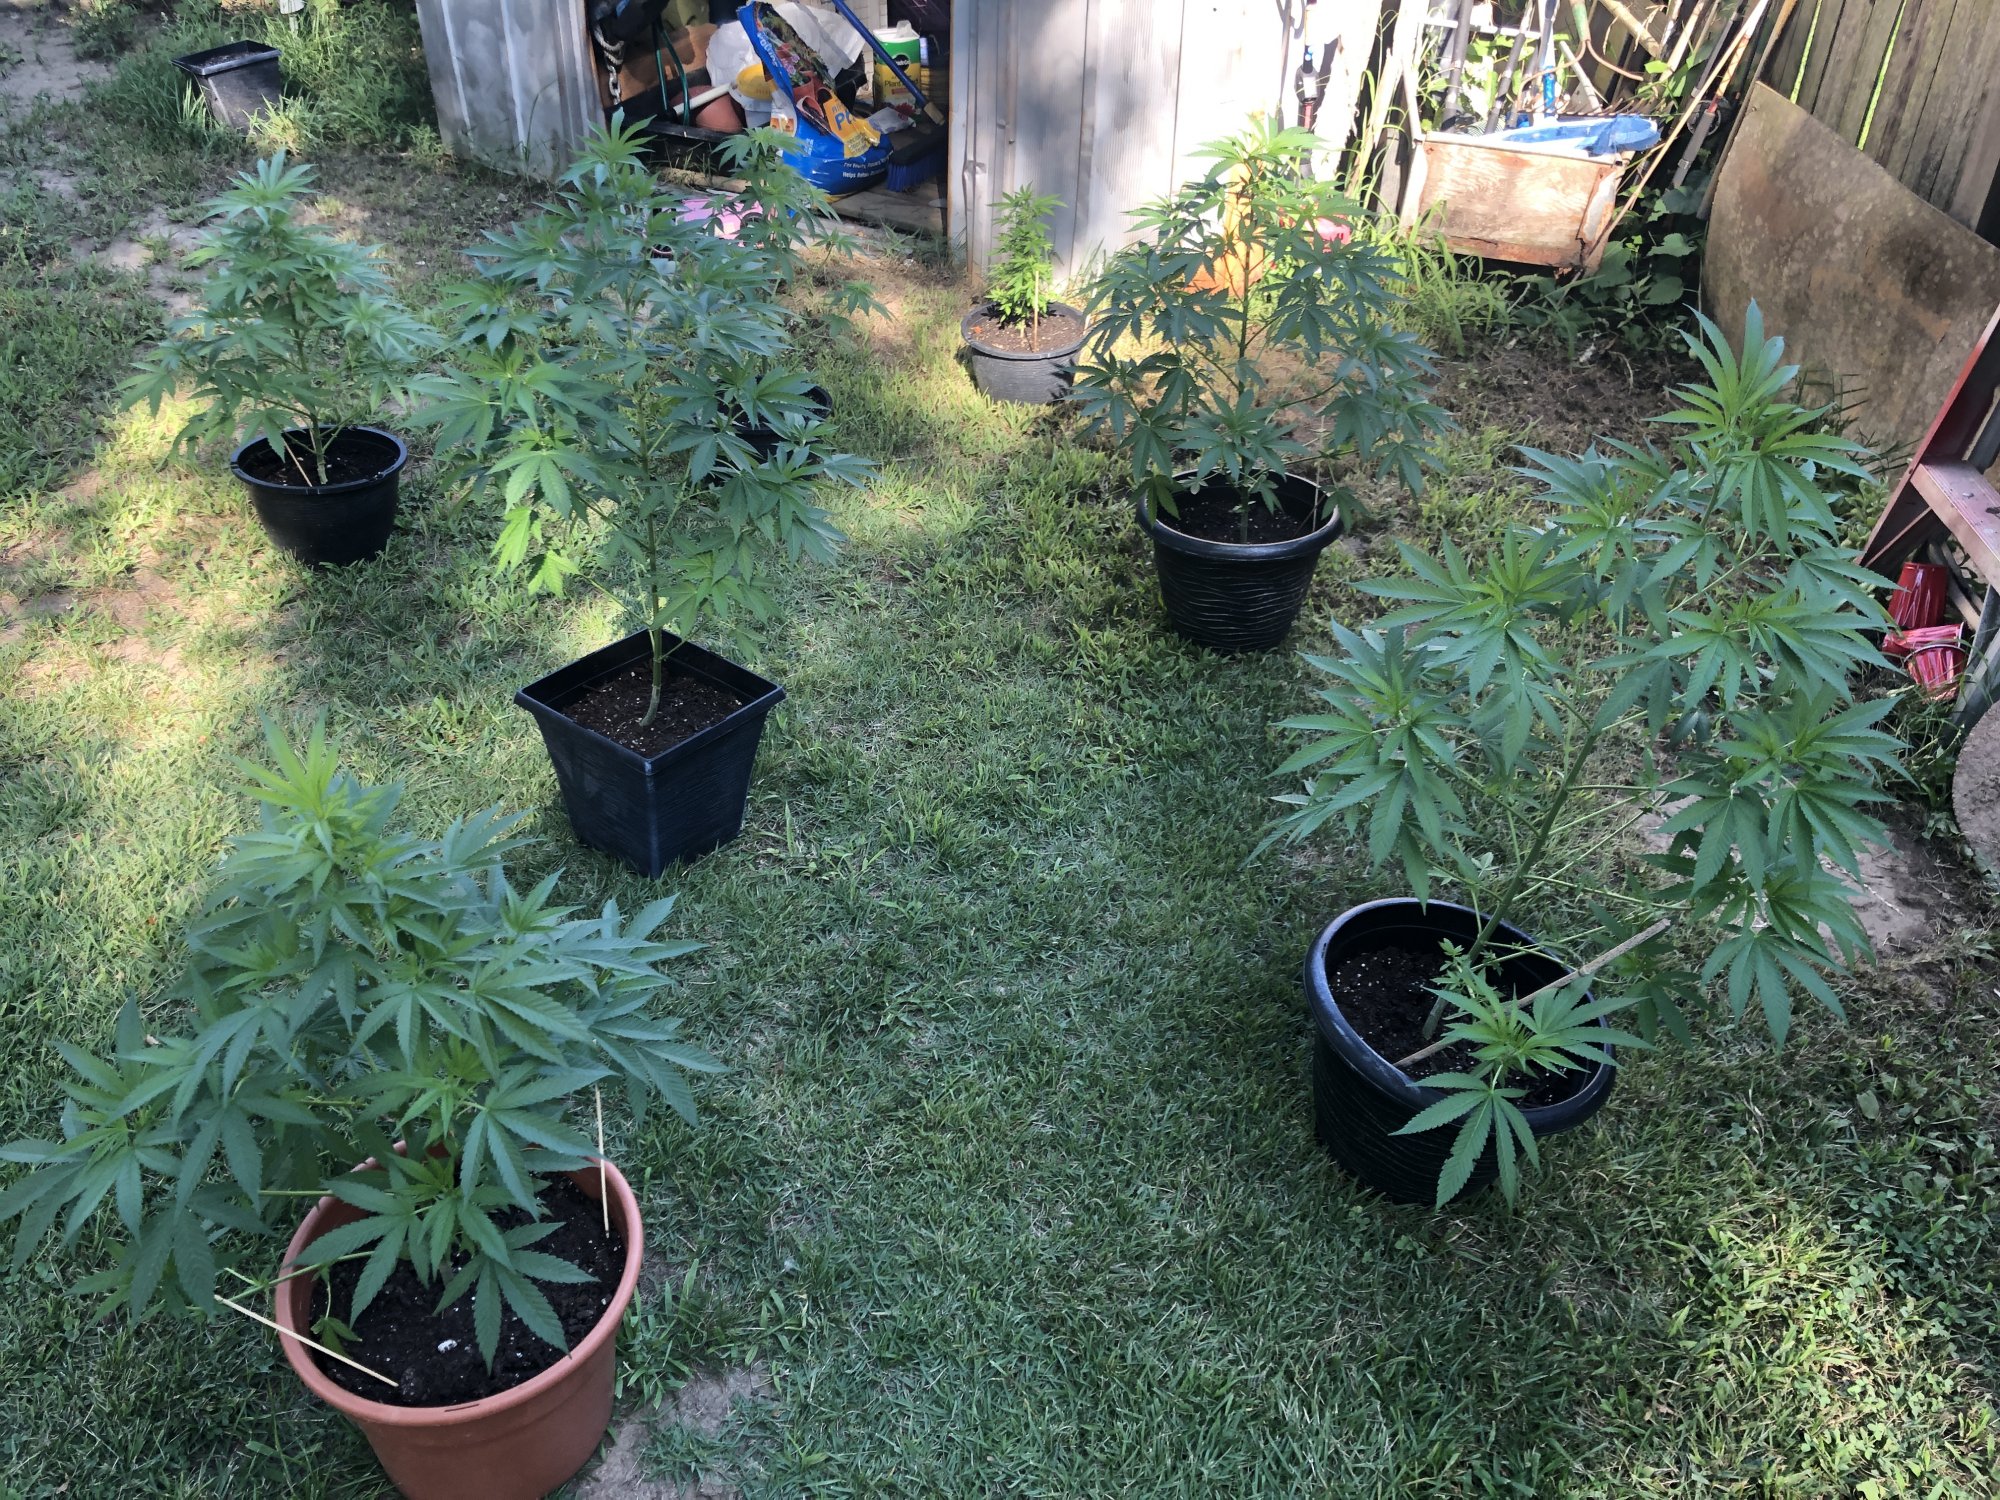 First time outdoor still learning any tips or advise greatly appreciated 4